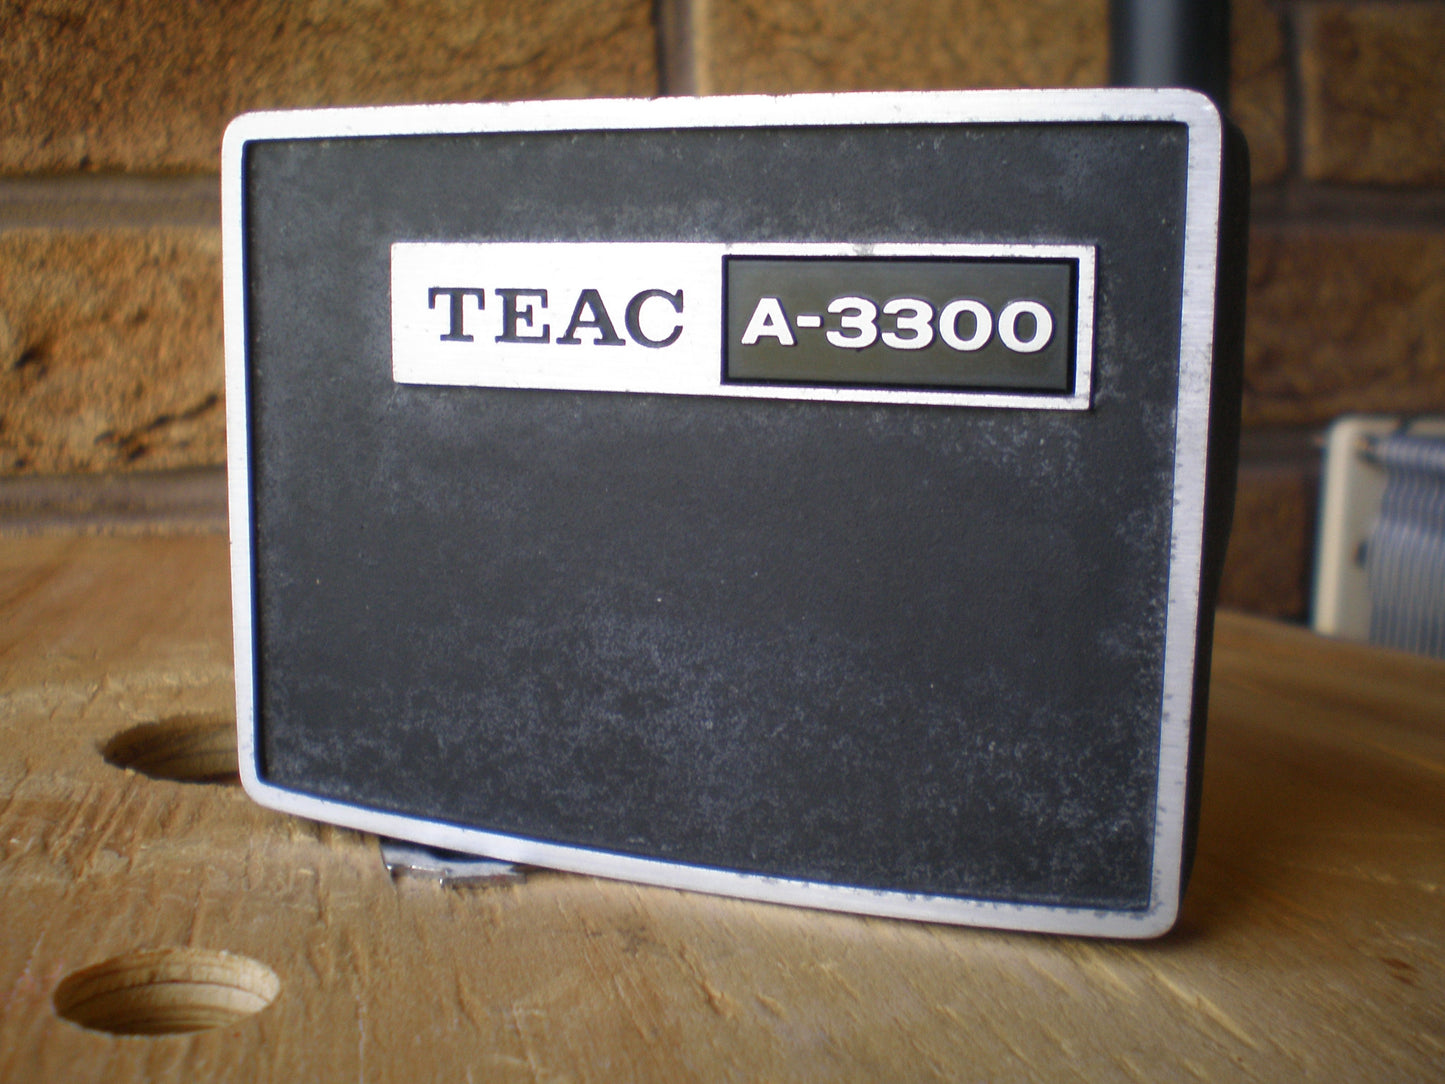 Teac A3300 front head cover